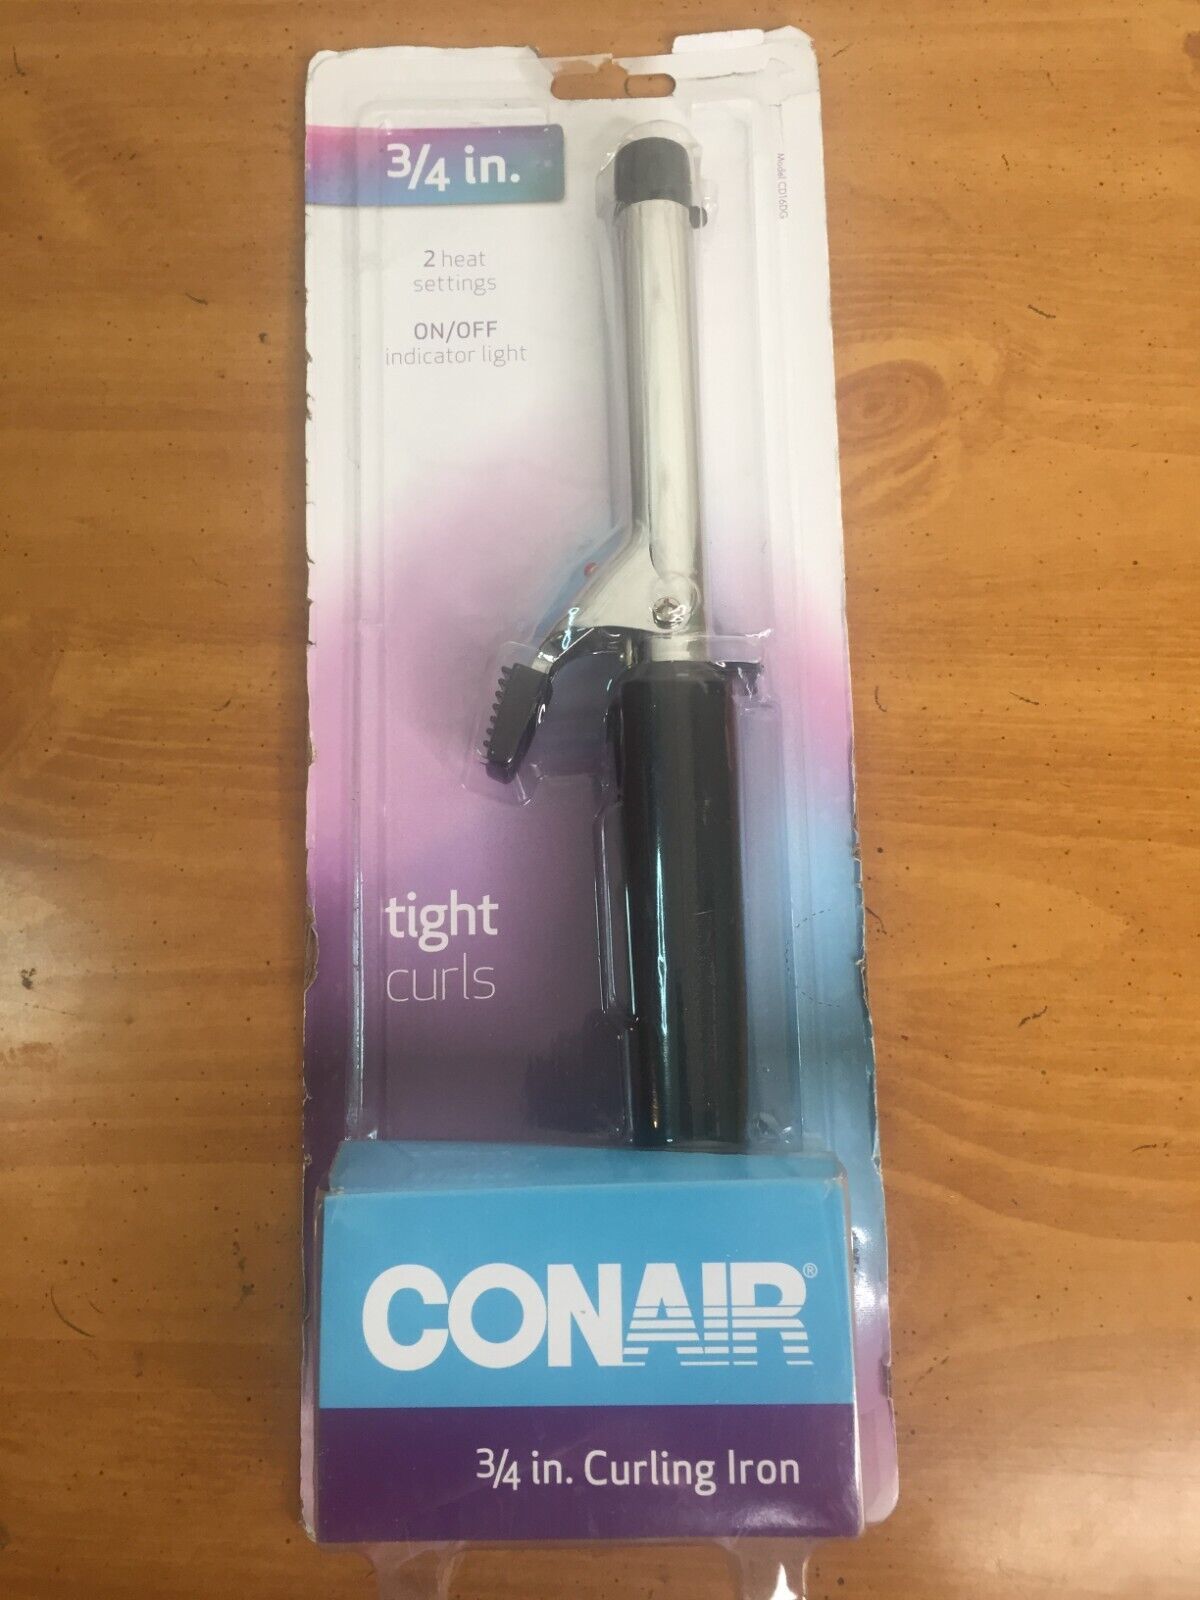 Primary image for Conair 3/4" Curling Iron Model CD16DG - 2 Heat Settings - New in Damaged Package